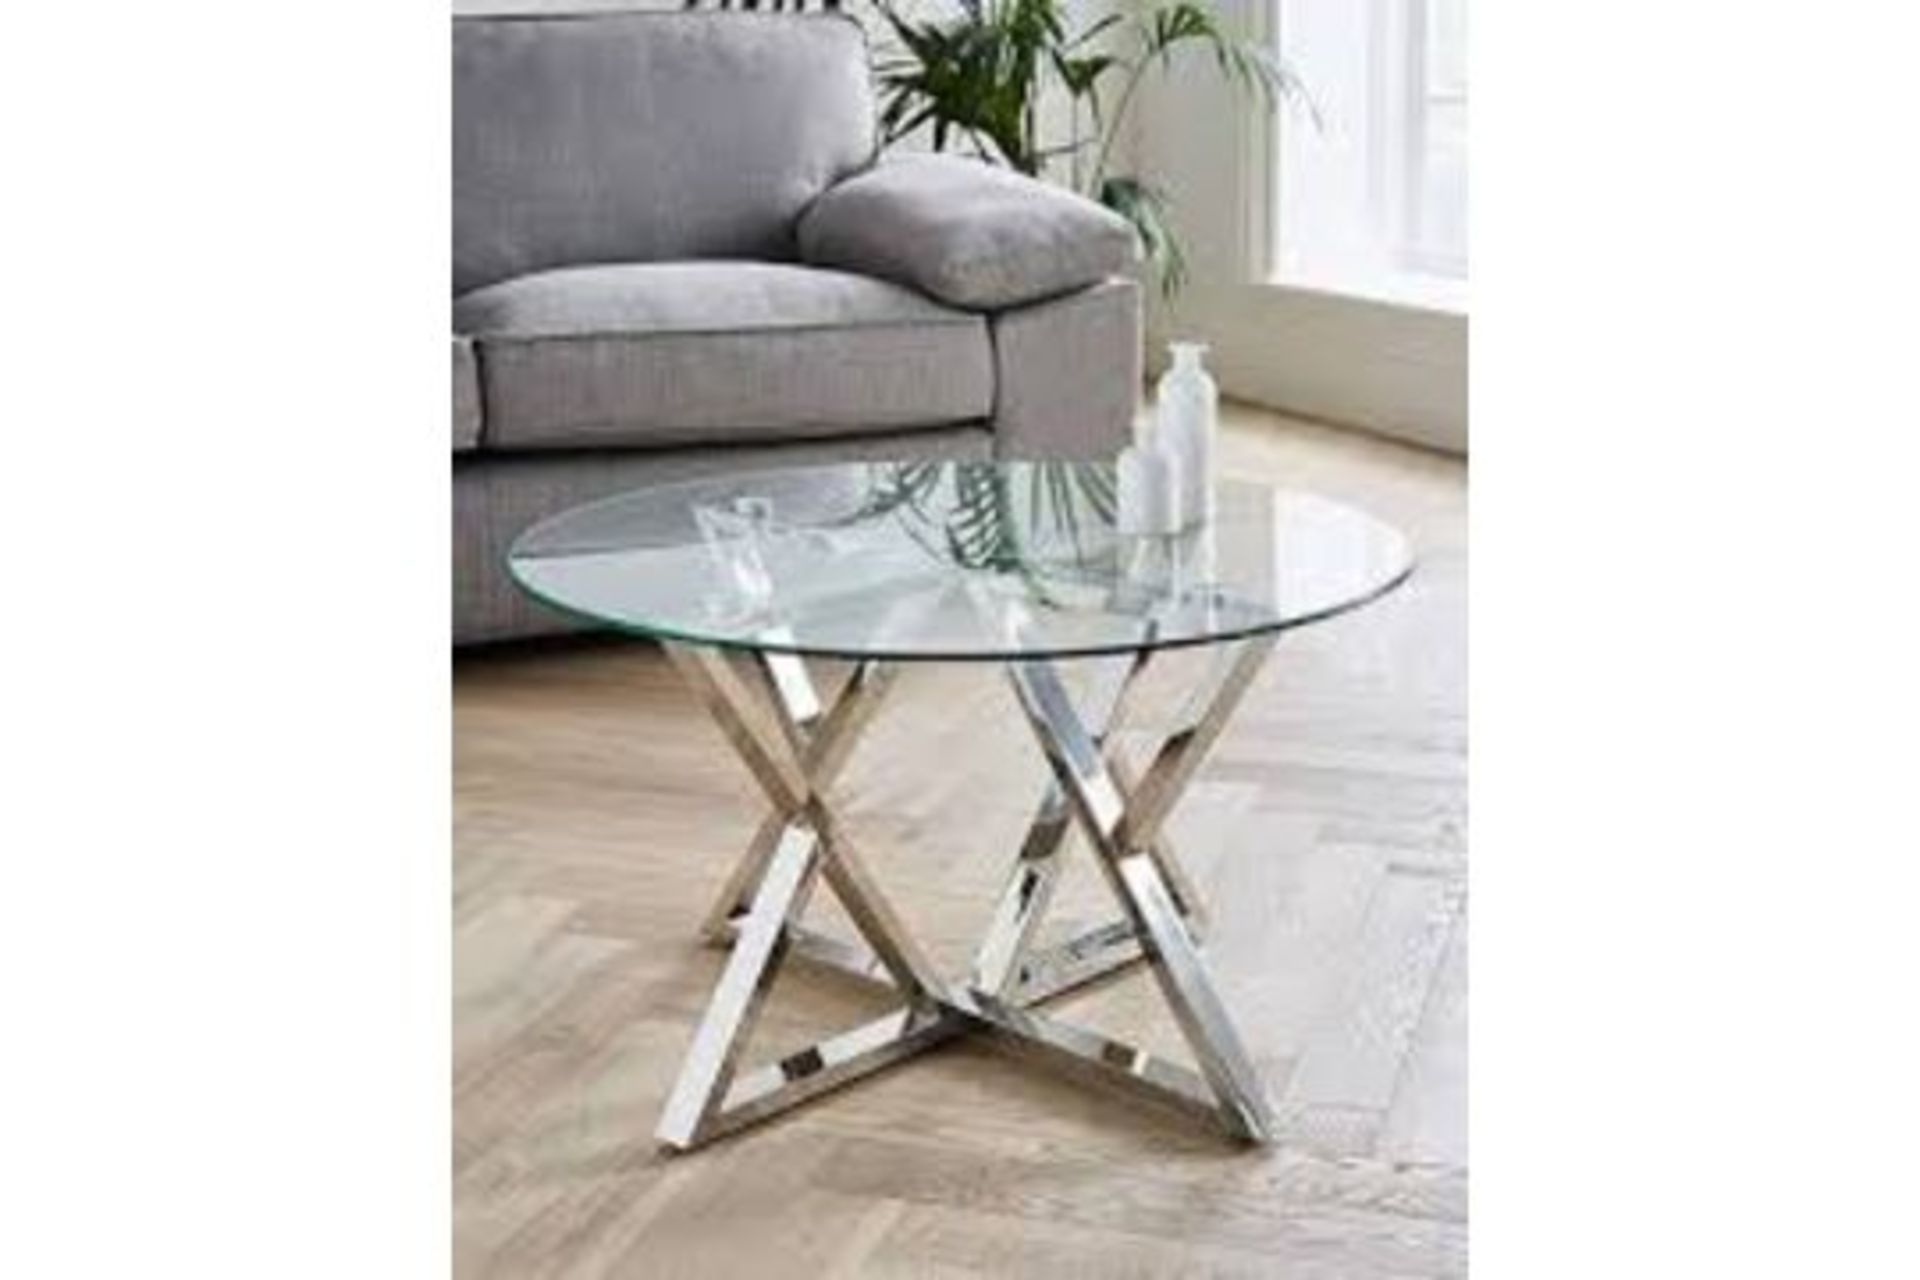 Brand New Estelle Coffee Table Chrome/Glass, Luxury Modern Look Coffee Table for that Centre piece